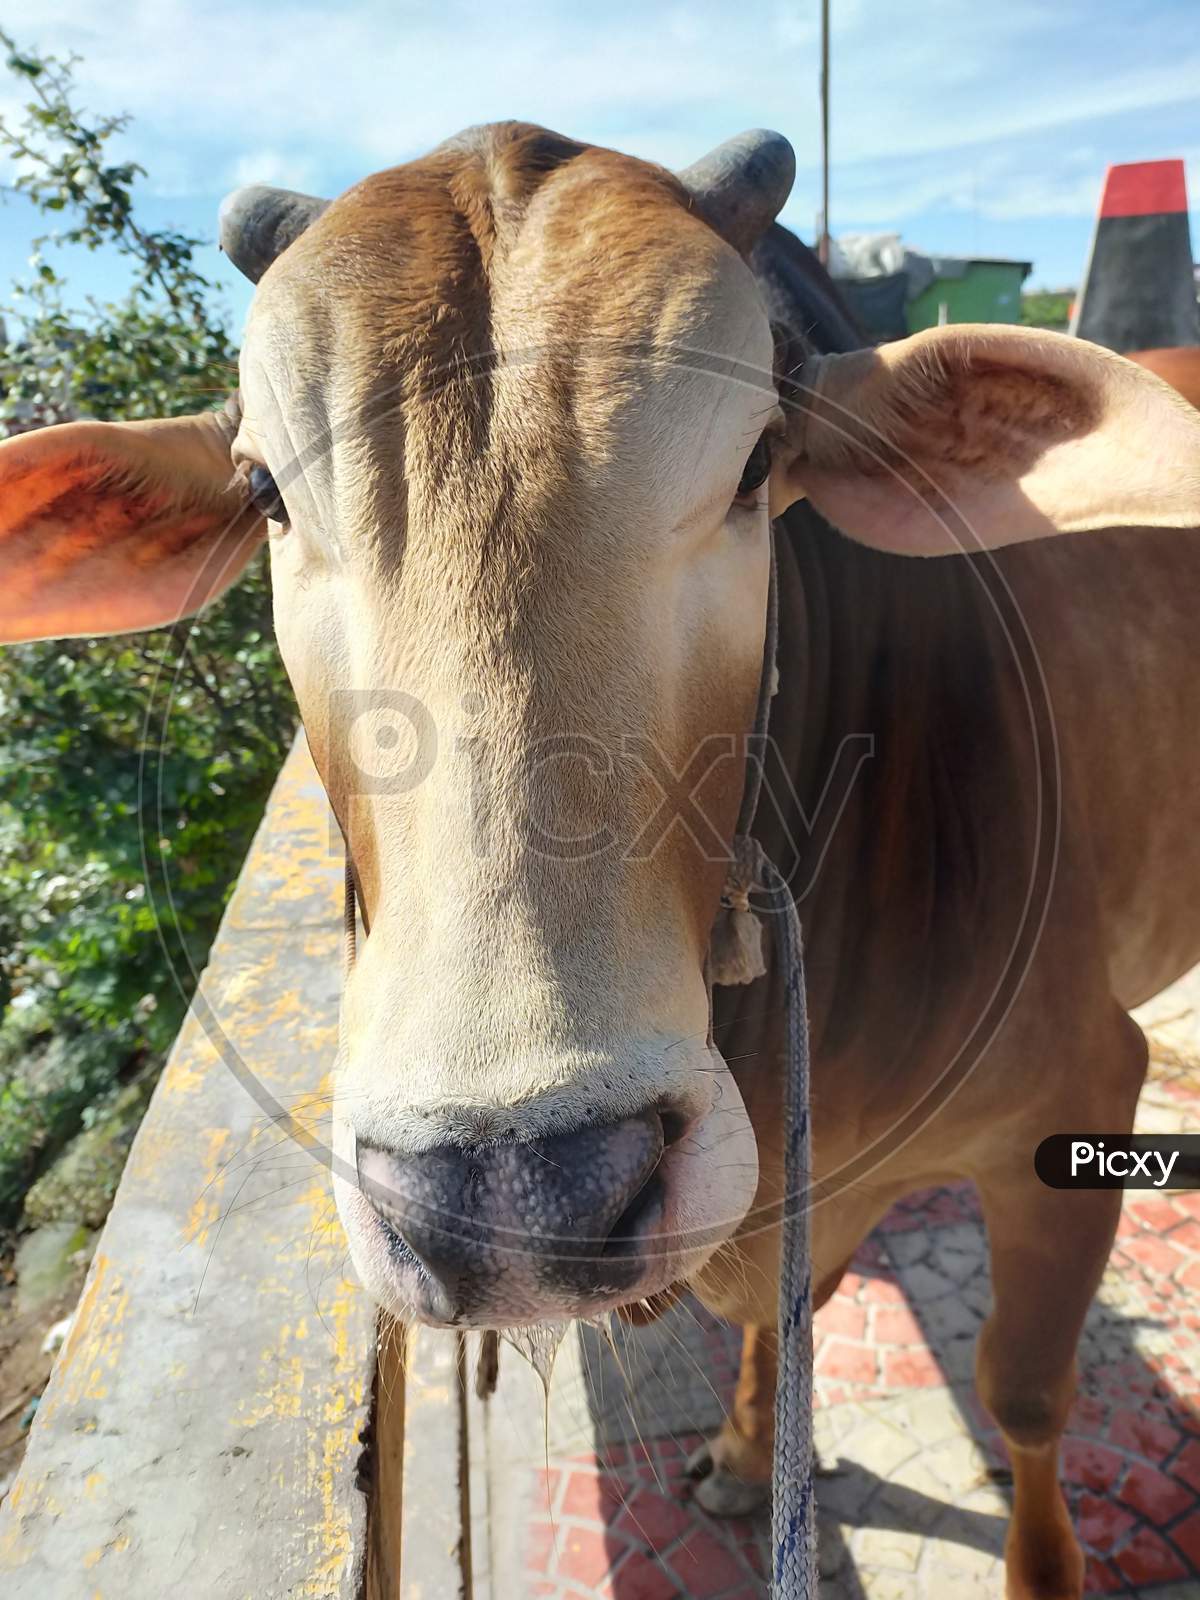 Cowfie!!! When cow strikes a pose for selfie!